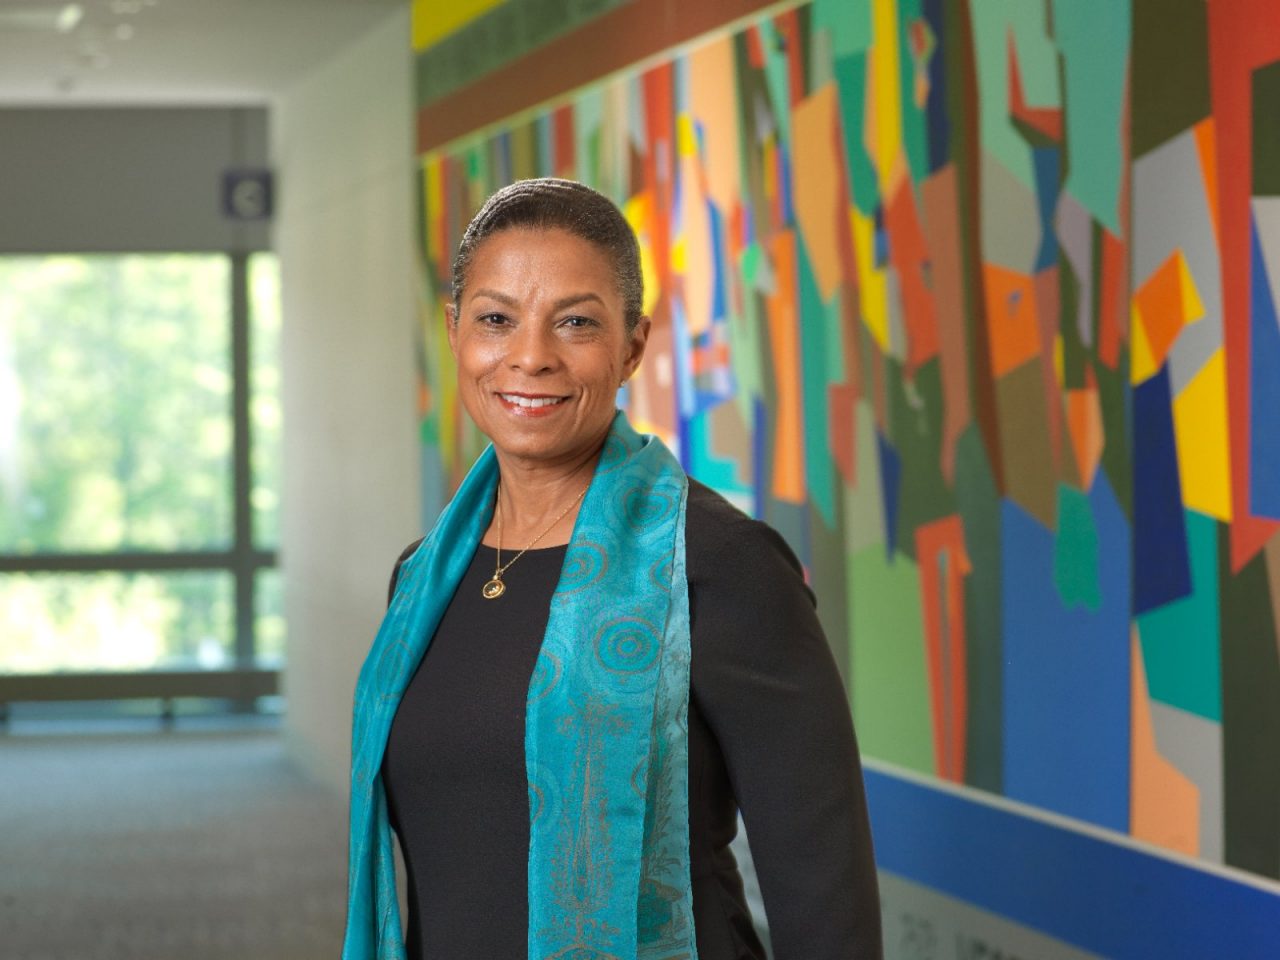 Portraits of Risa Lavizzo-Mourey, President and CEO of the Robert Wood Johnson Foundation. Photographed in May 2014 in Princeton, N.J., approved for use June 2014. 